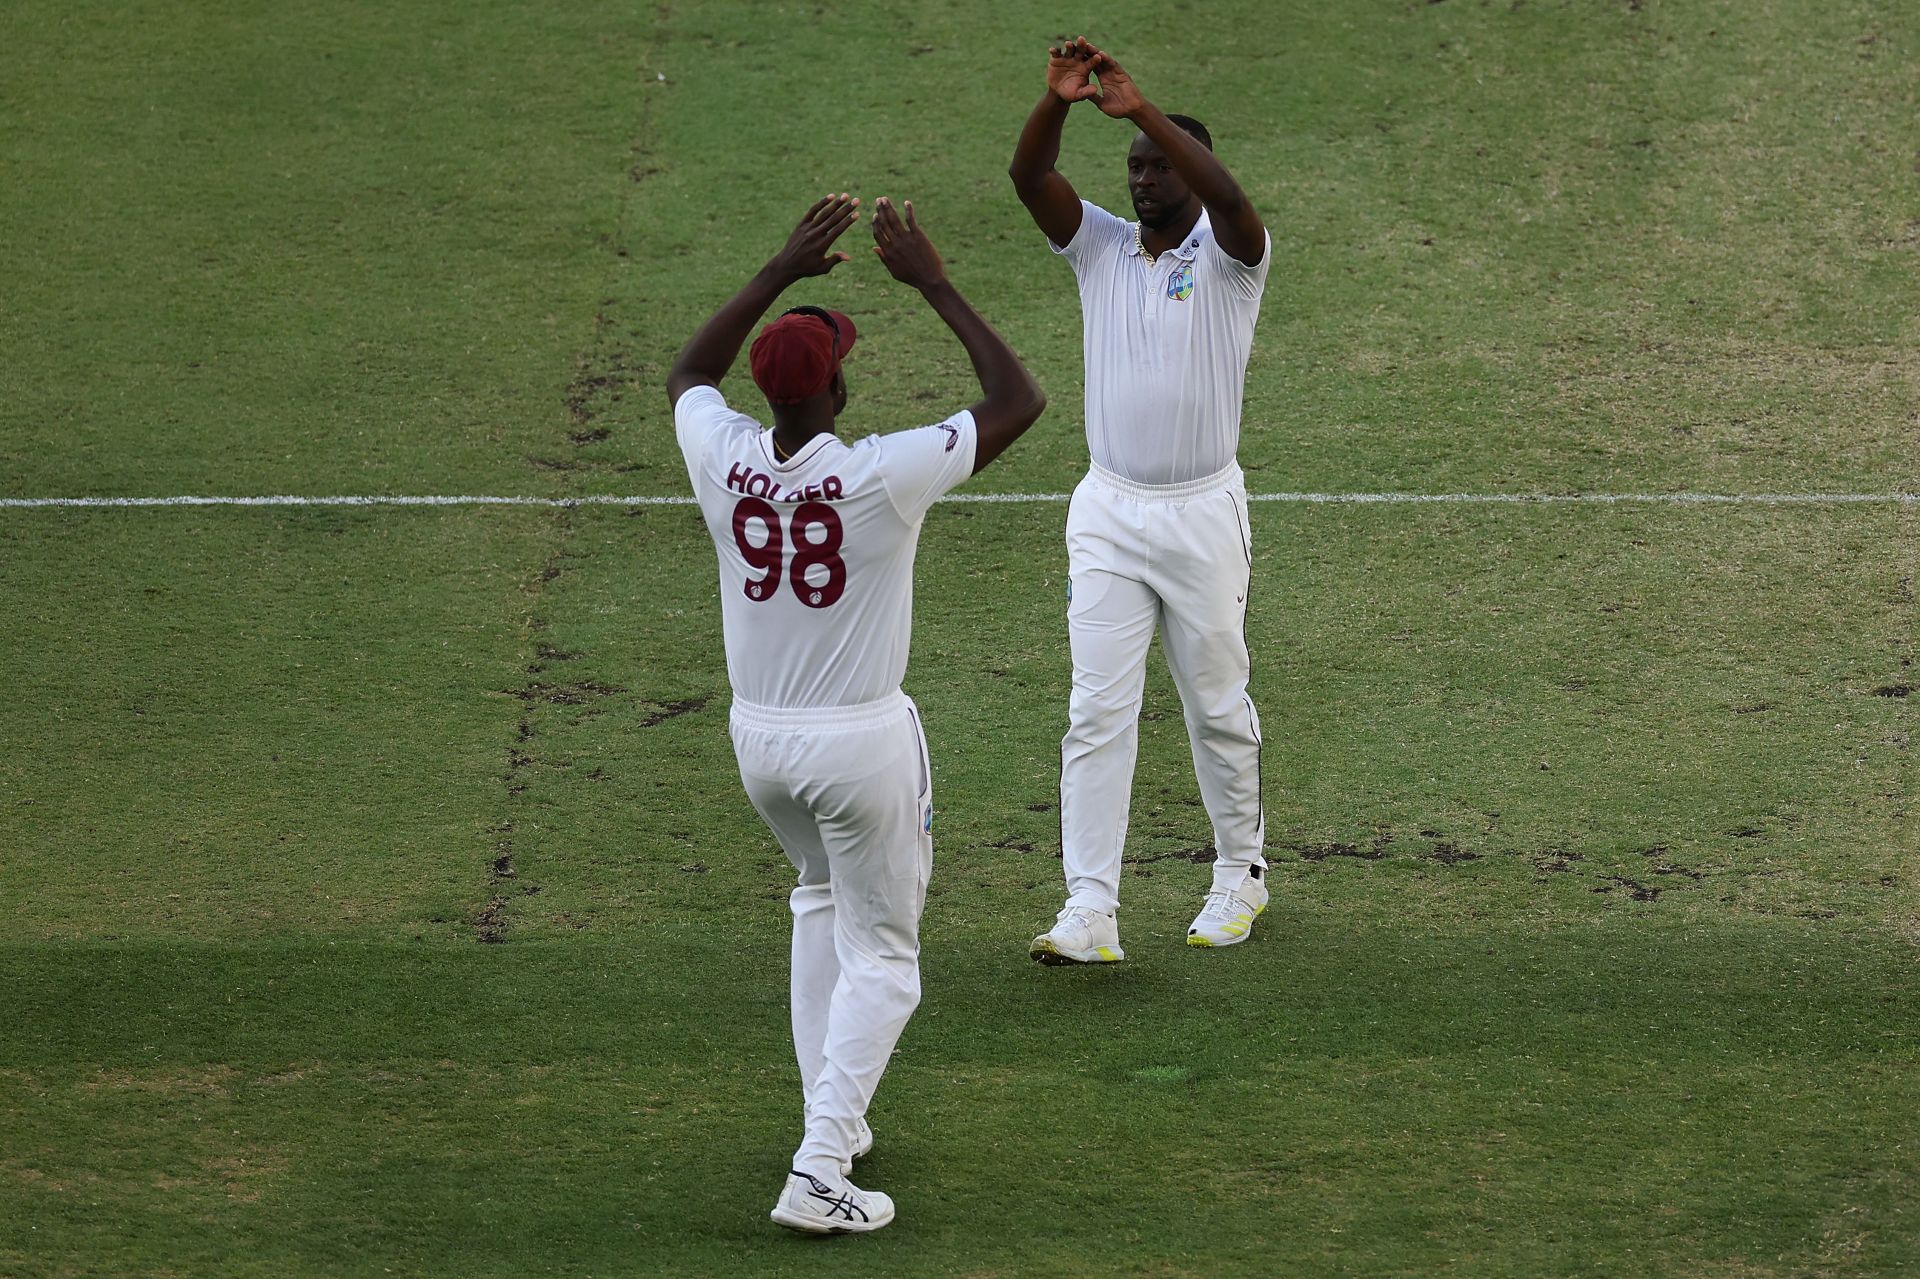 West Indies bowling will pose a challenge